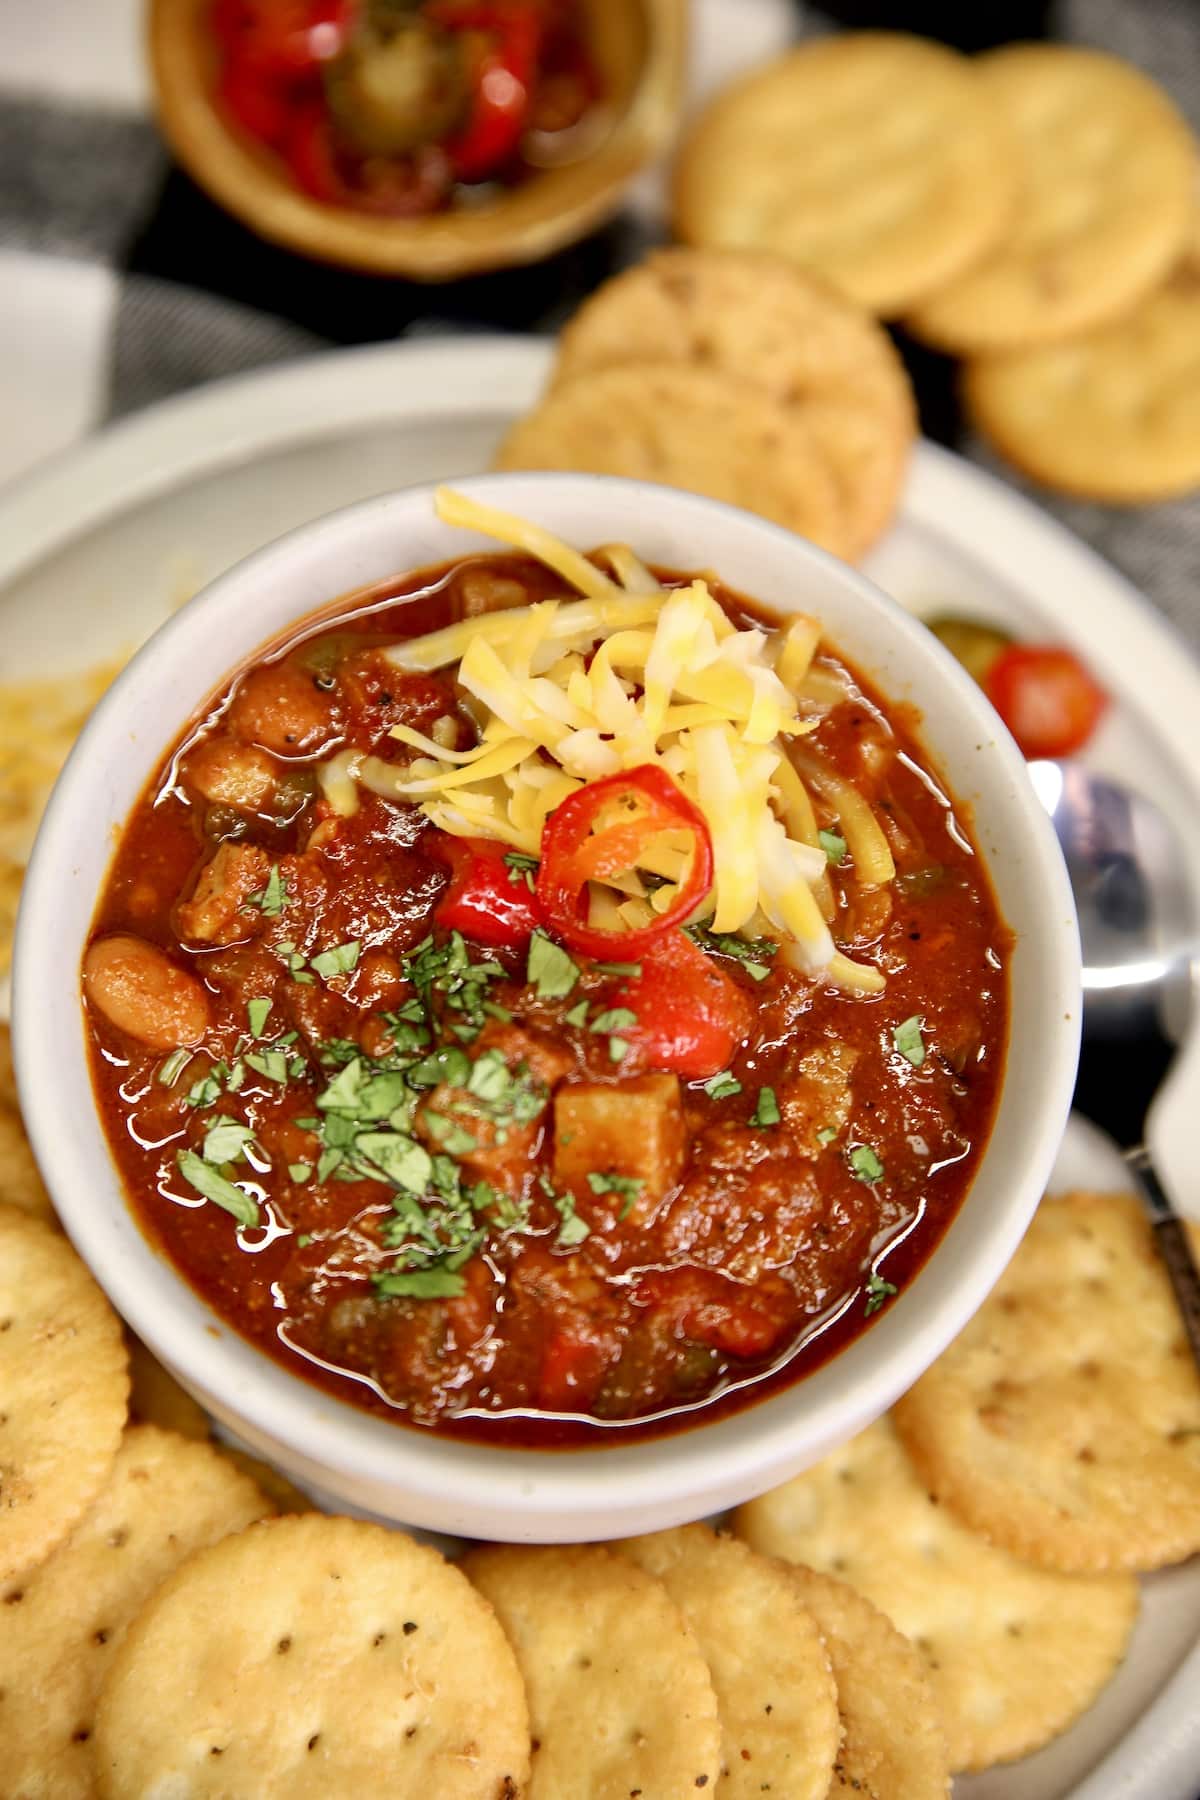 Brisket Chili in a bowl with shredded cheese, on a plate with crackers.